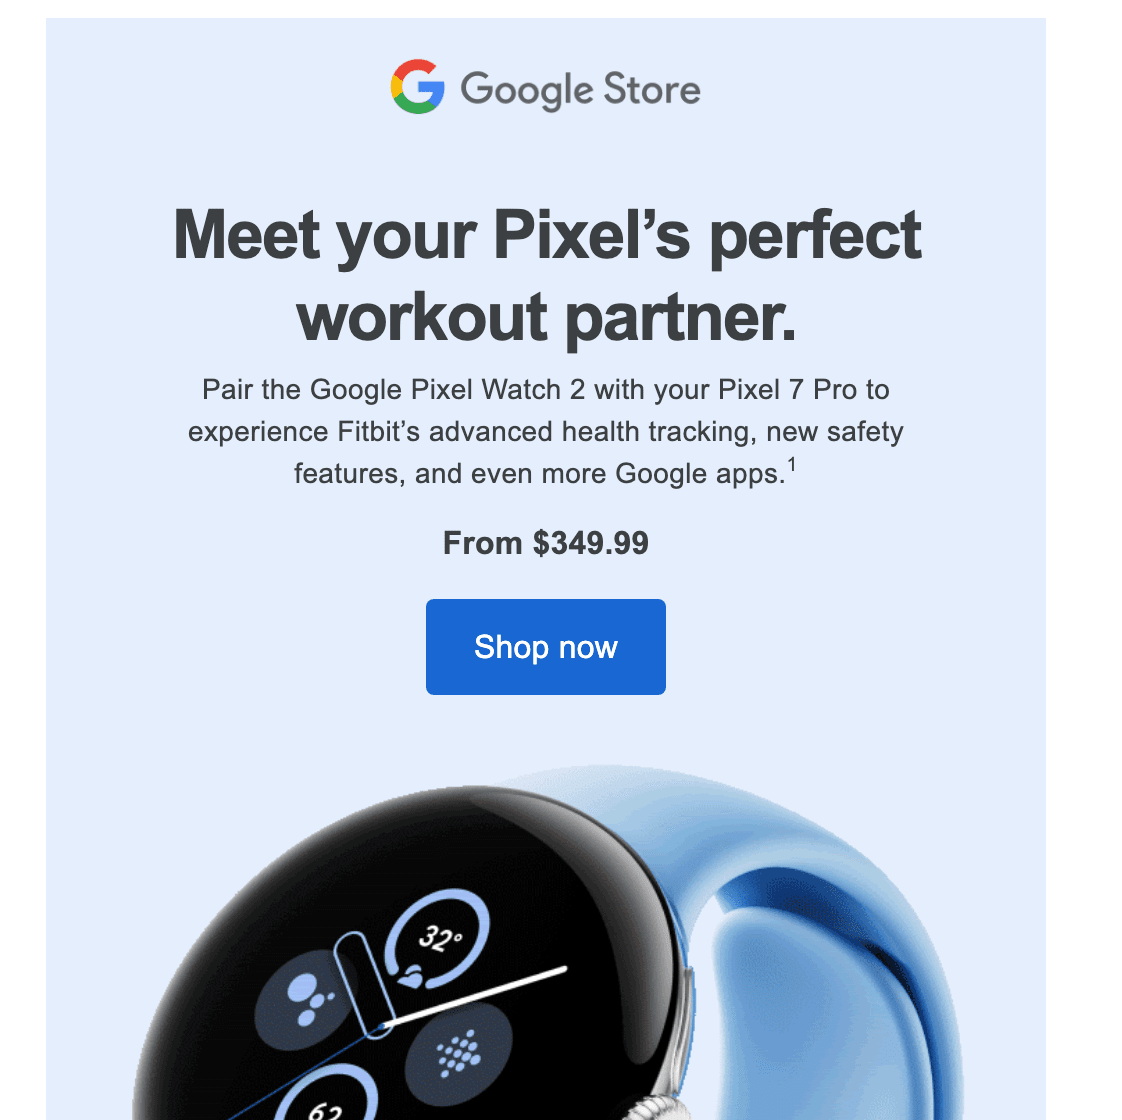 "Meet your Pixel's perfect workout partner" email from Google Store